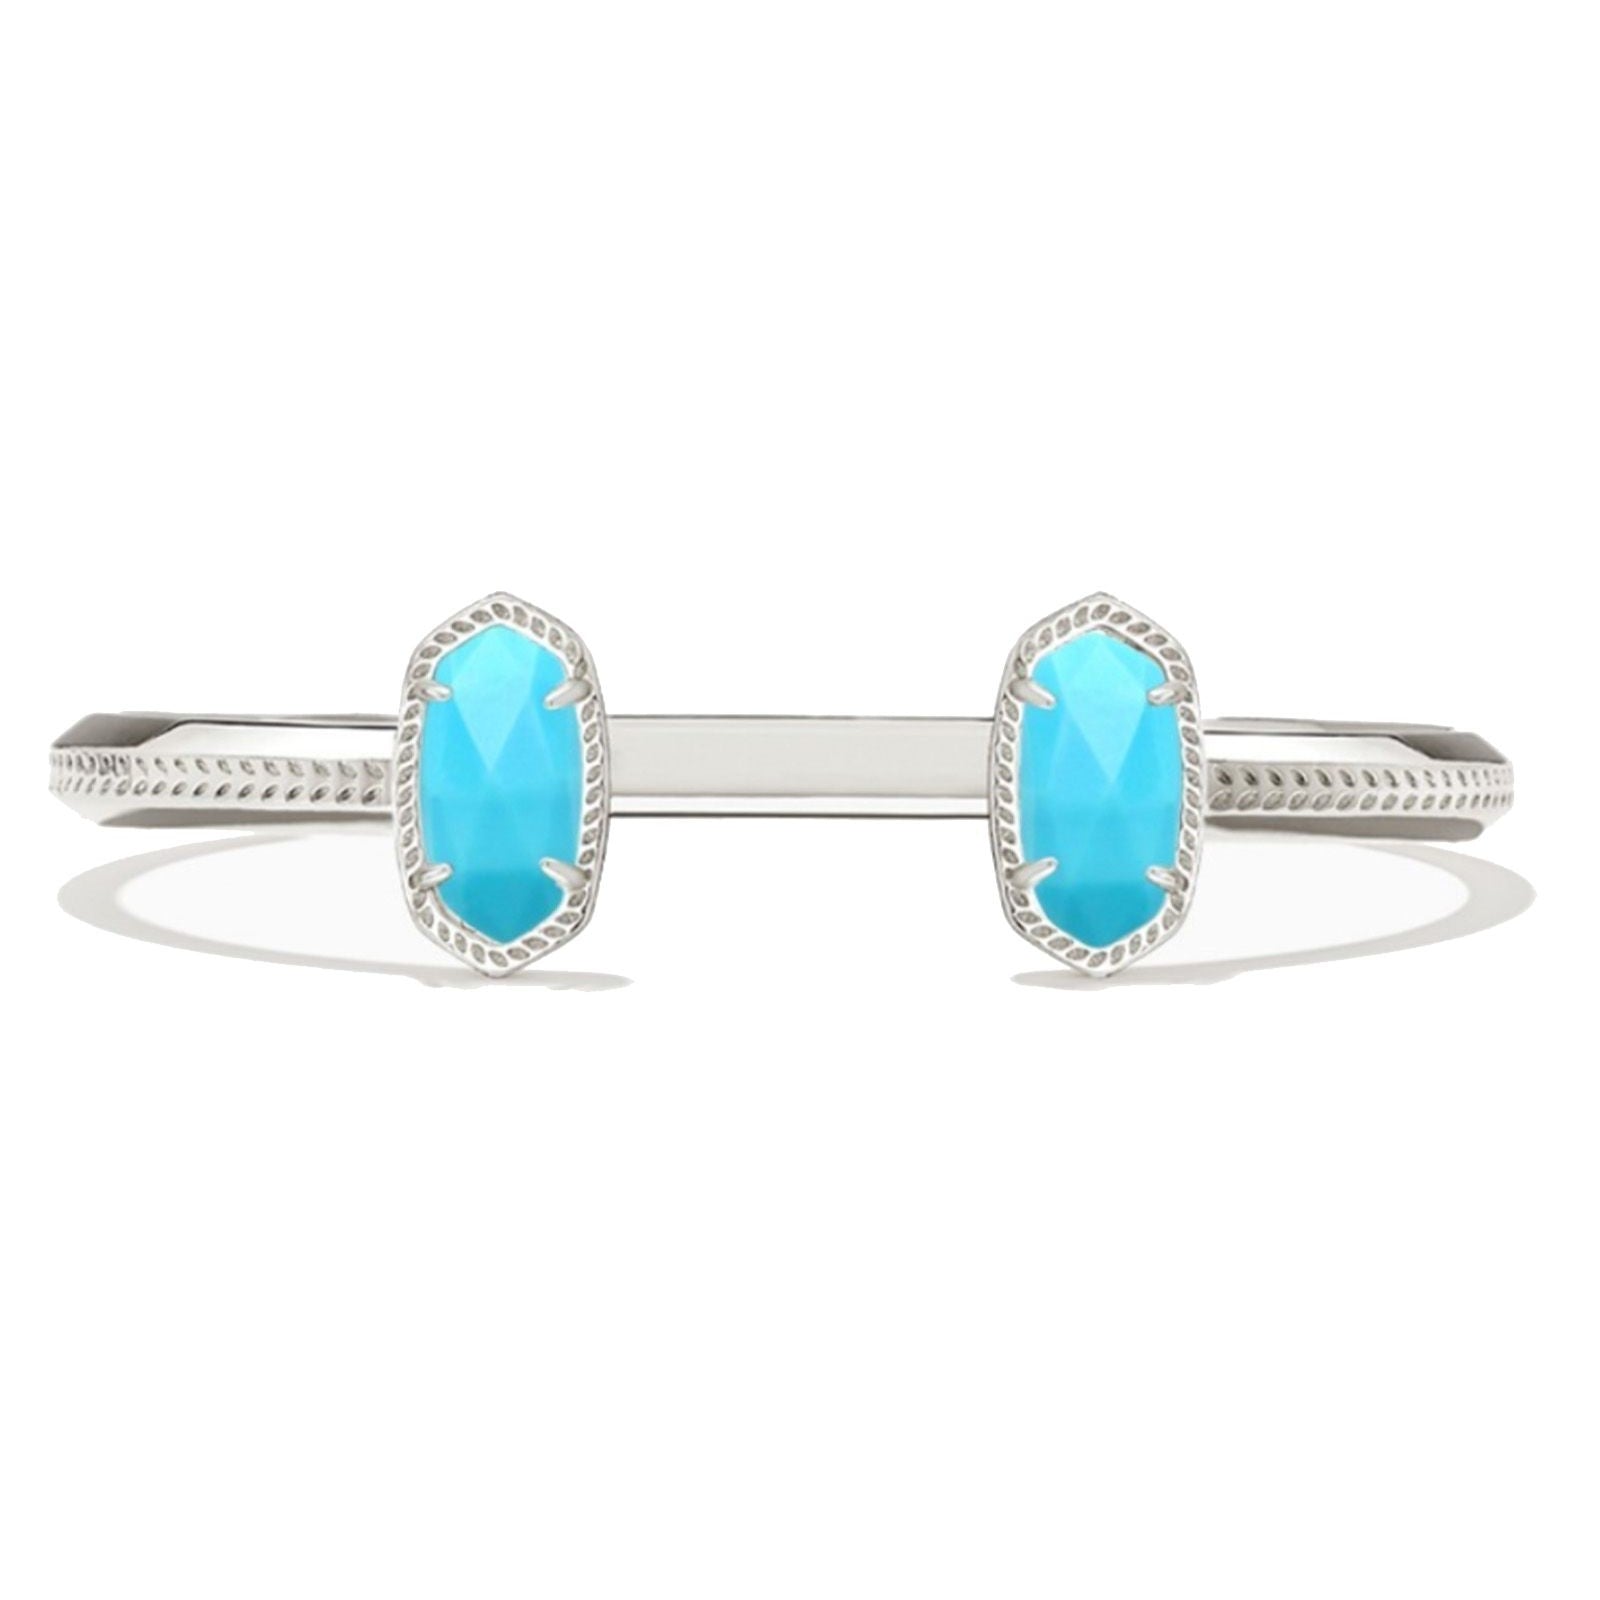 Kendra Scott | Elton Silver Cuff Bracelet in Variegated Turquoise Magnesite - Giddy Up Glamour Boutique